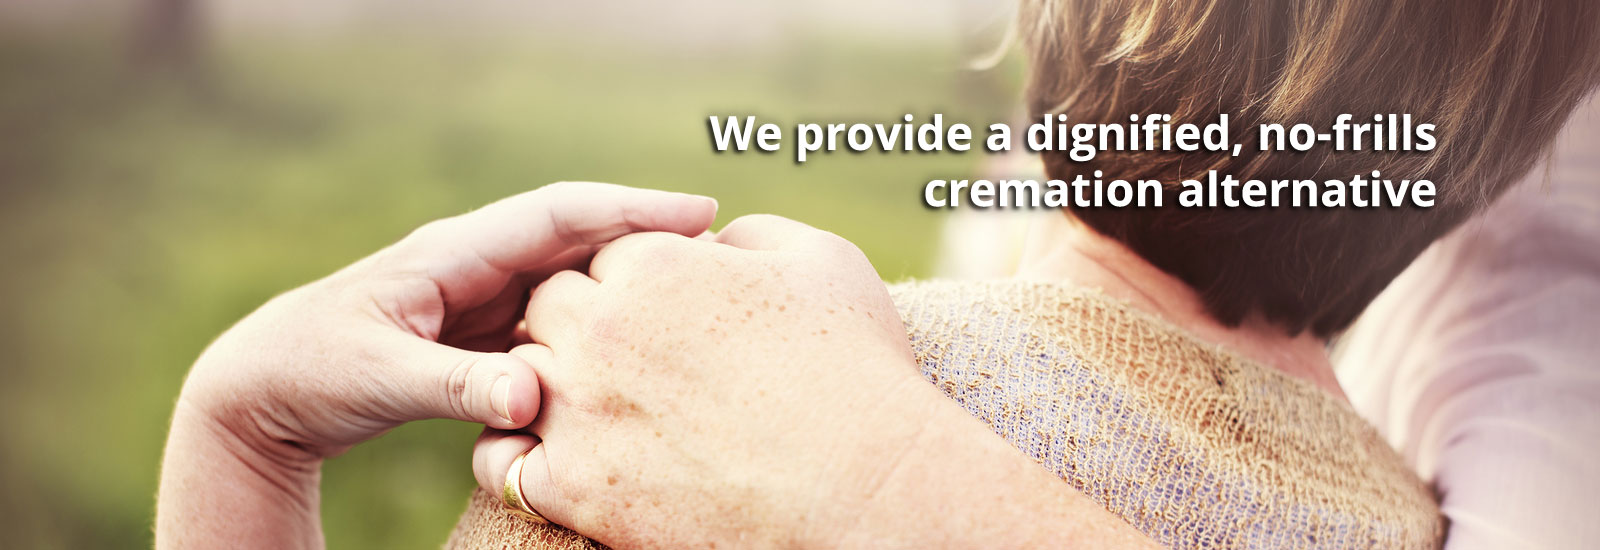 We provide a dignified, no-frills cremation alternative